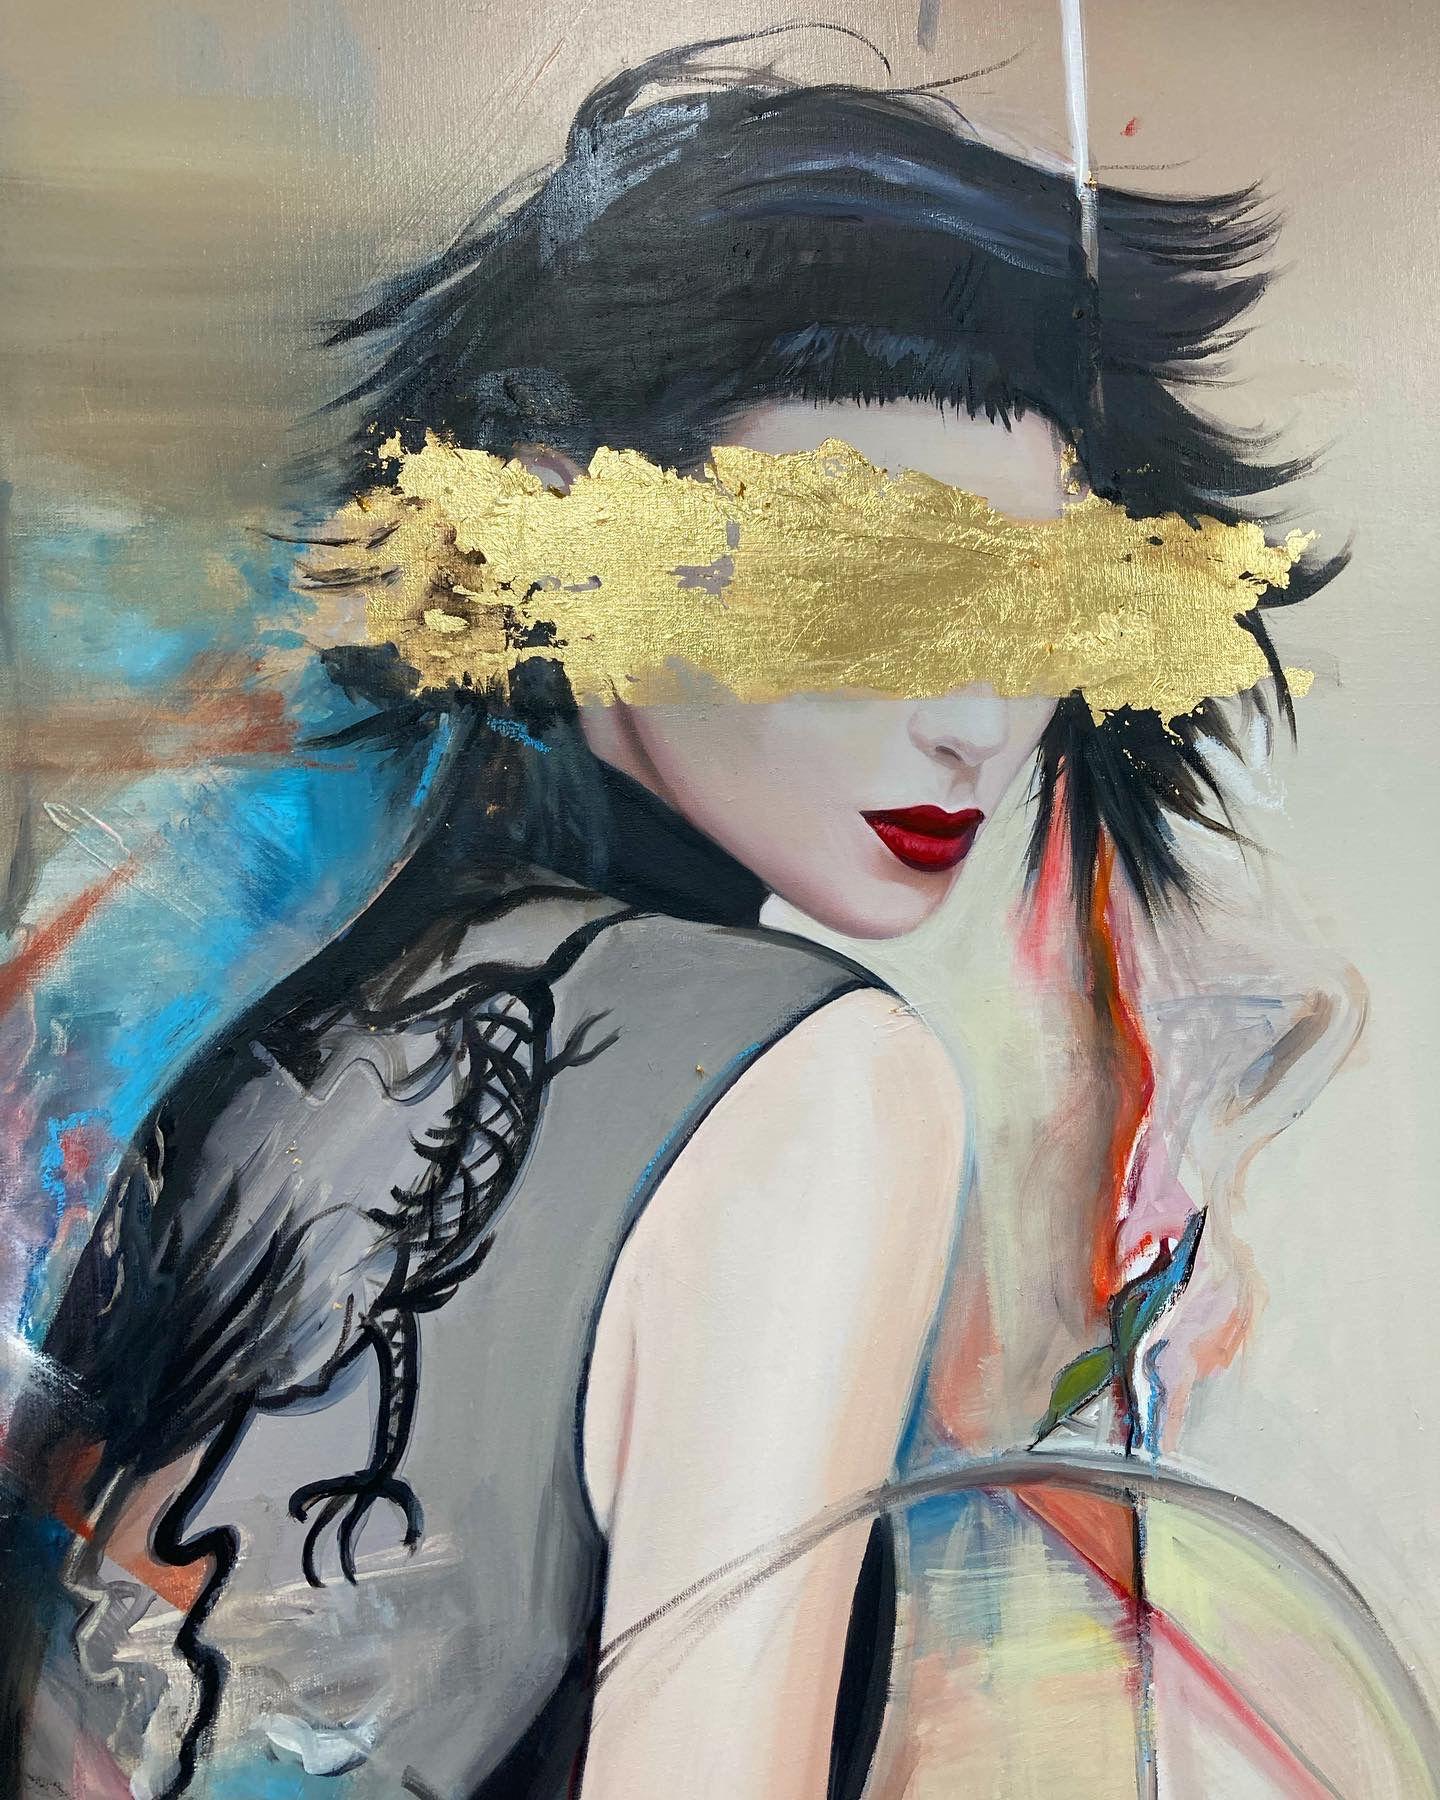 Oil Paint and gold leaf on canvas utilizing abstract realism

76cm x 100cm 

Signed by the artist